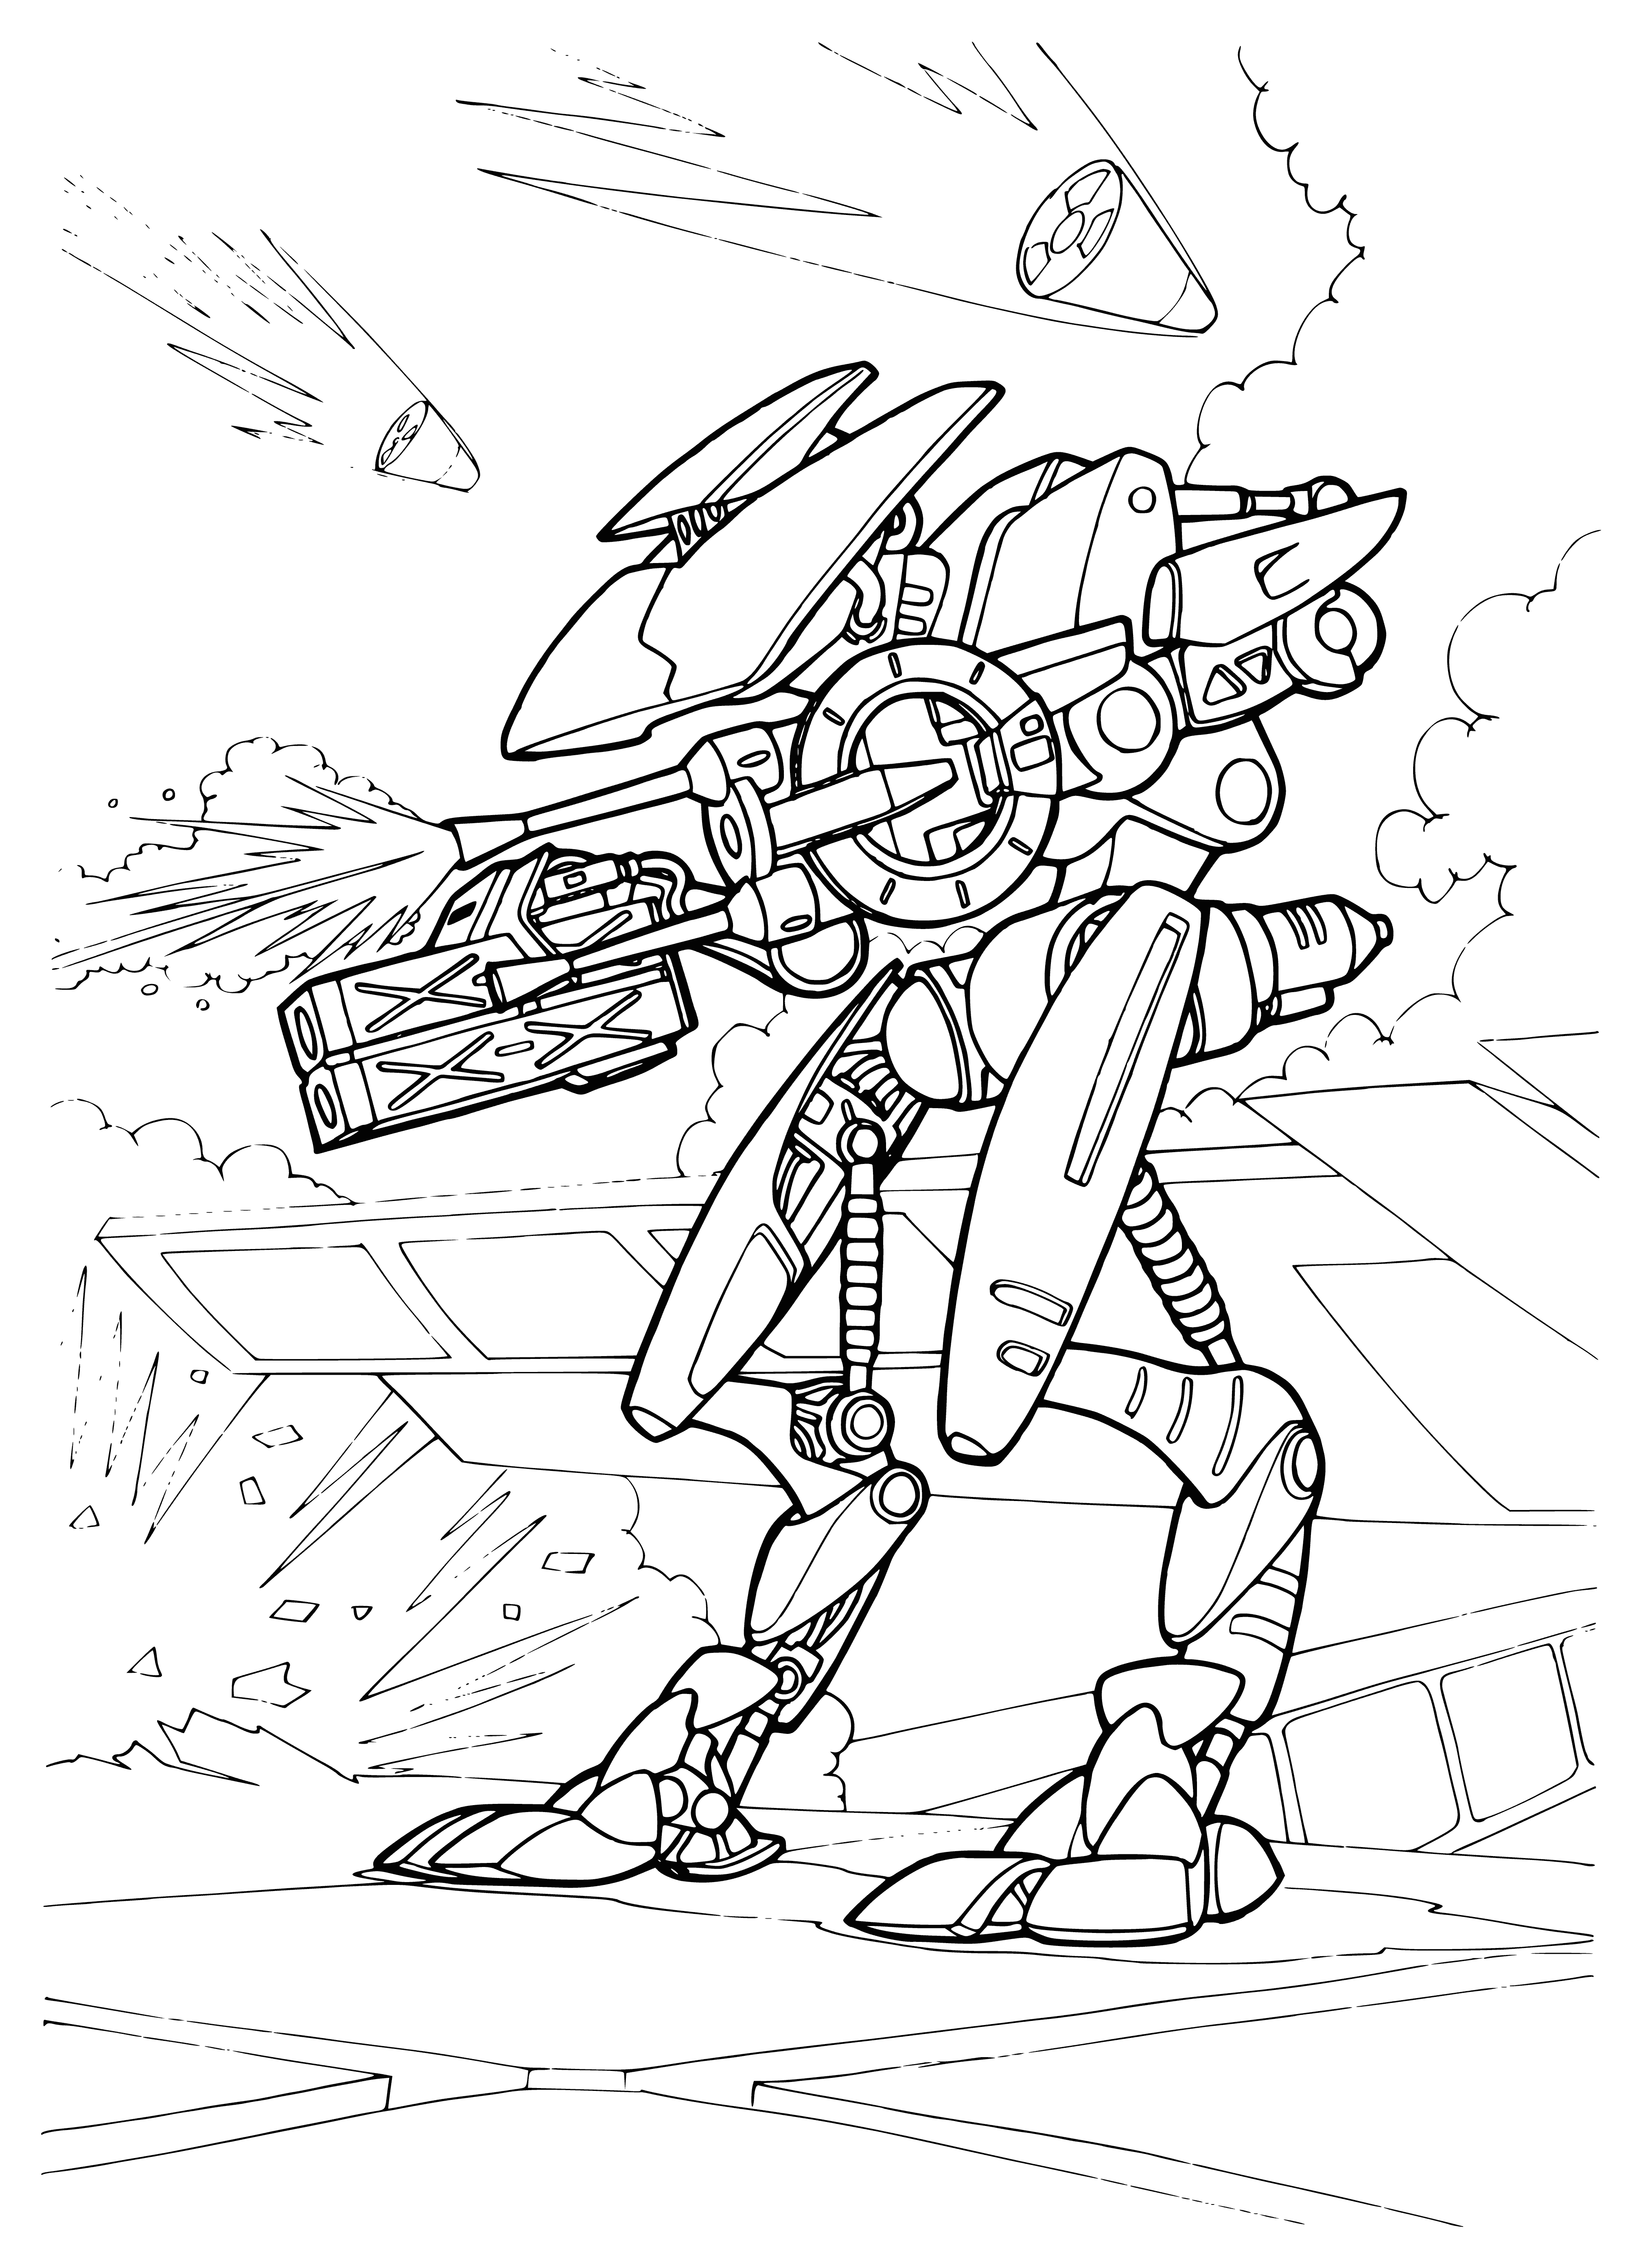 coloring page: Man faces off against mech. creature in dry, rocky landscape. He stands with rifle in tattered uniform, while creature fires from a distance.